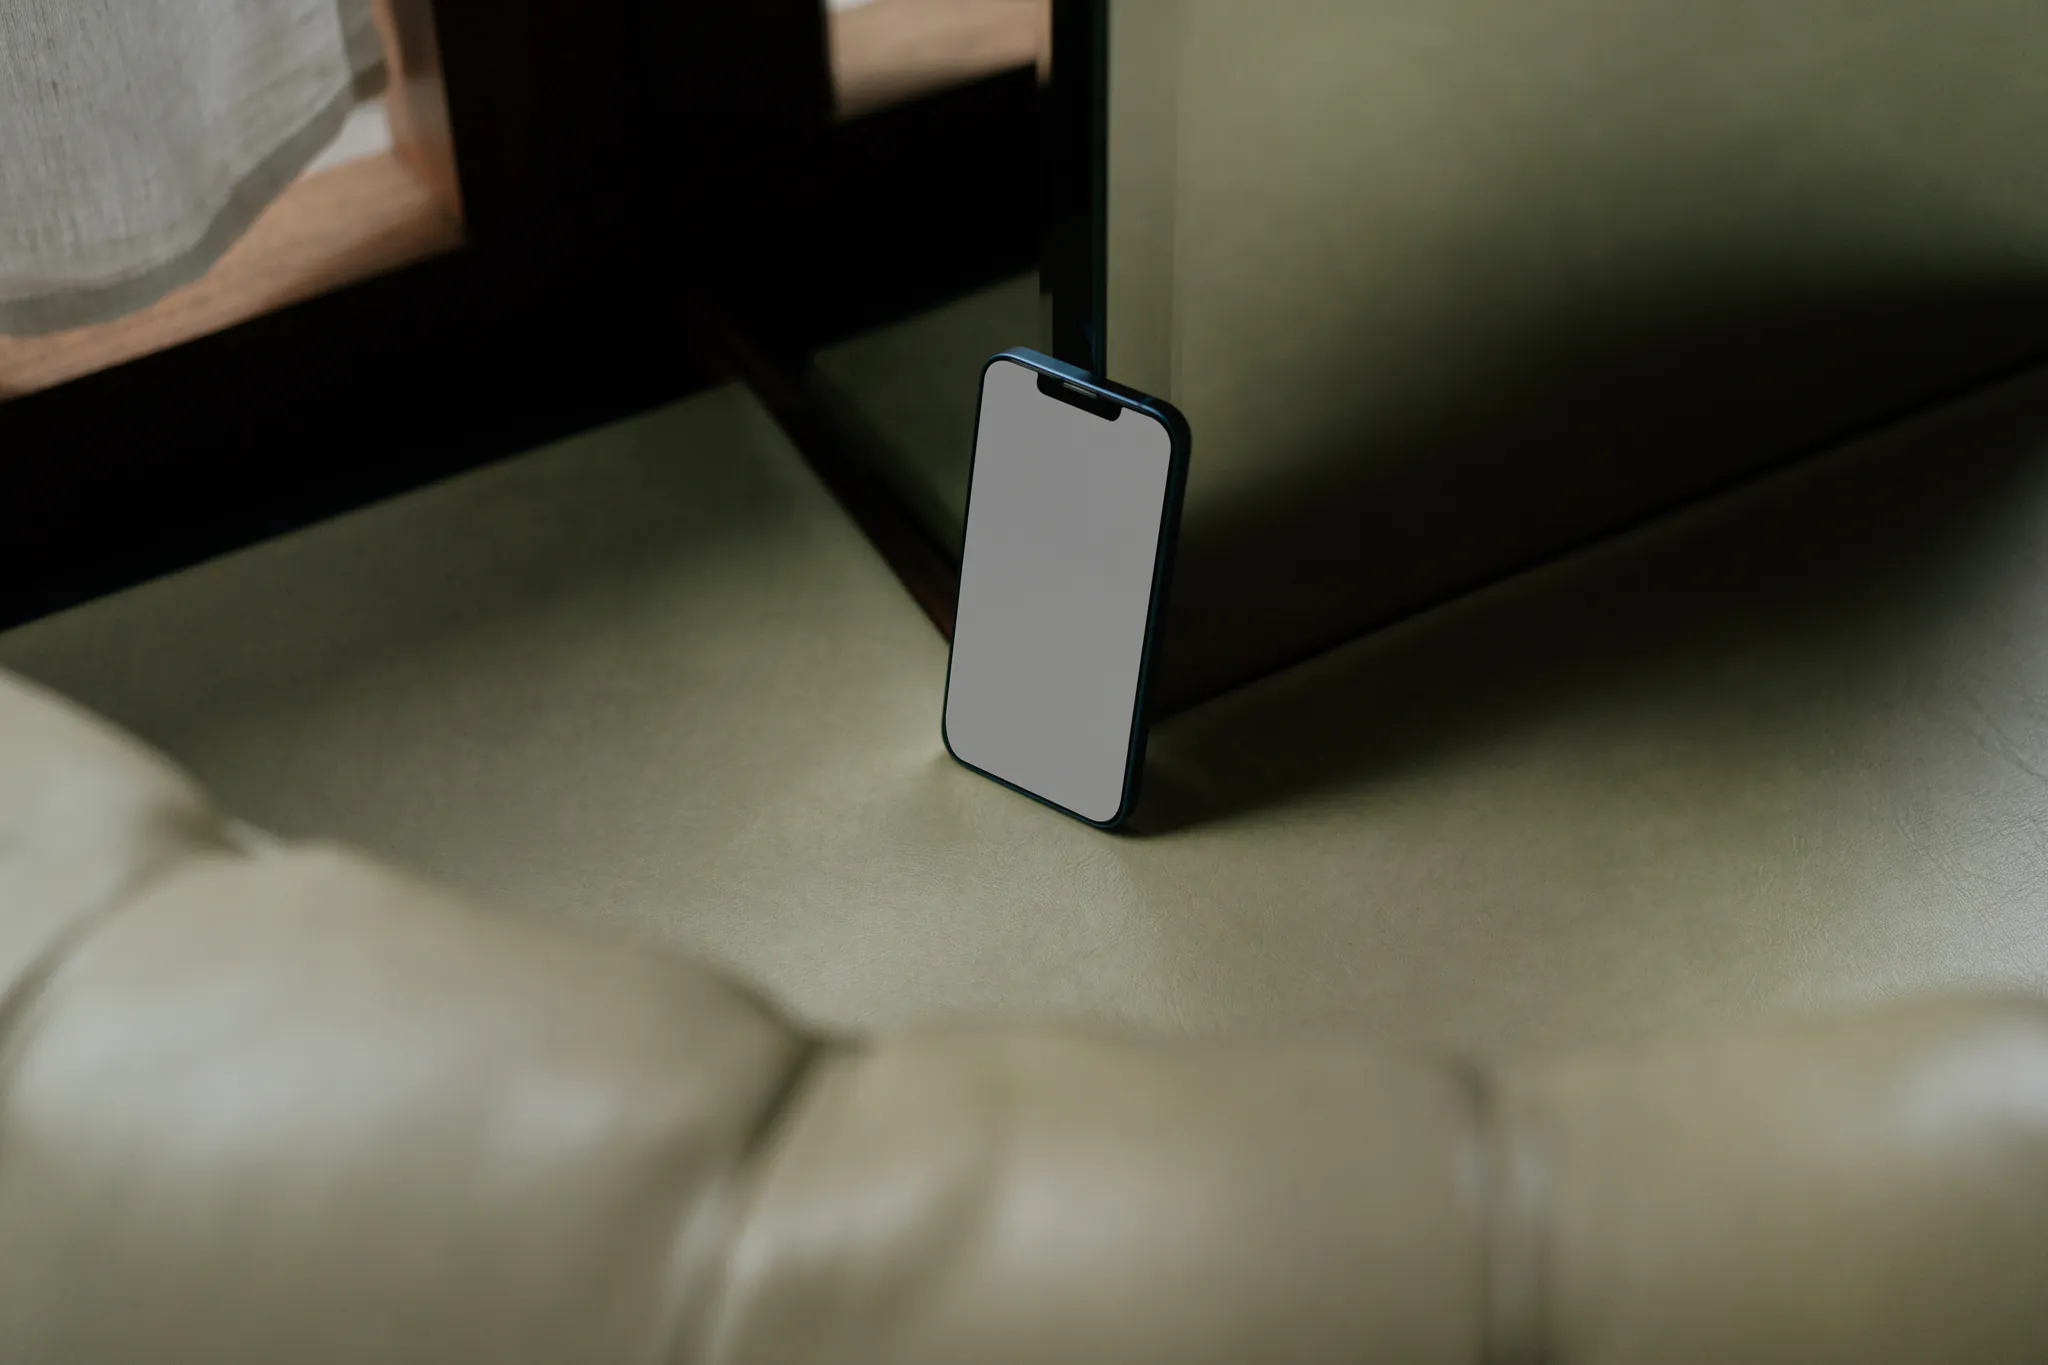 Iphone mockup behind a green leather couch next to a mirror